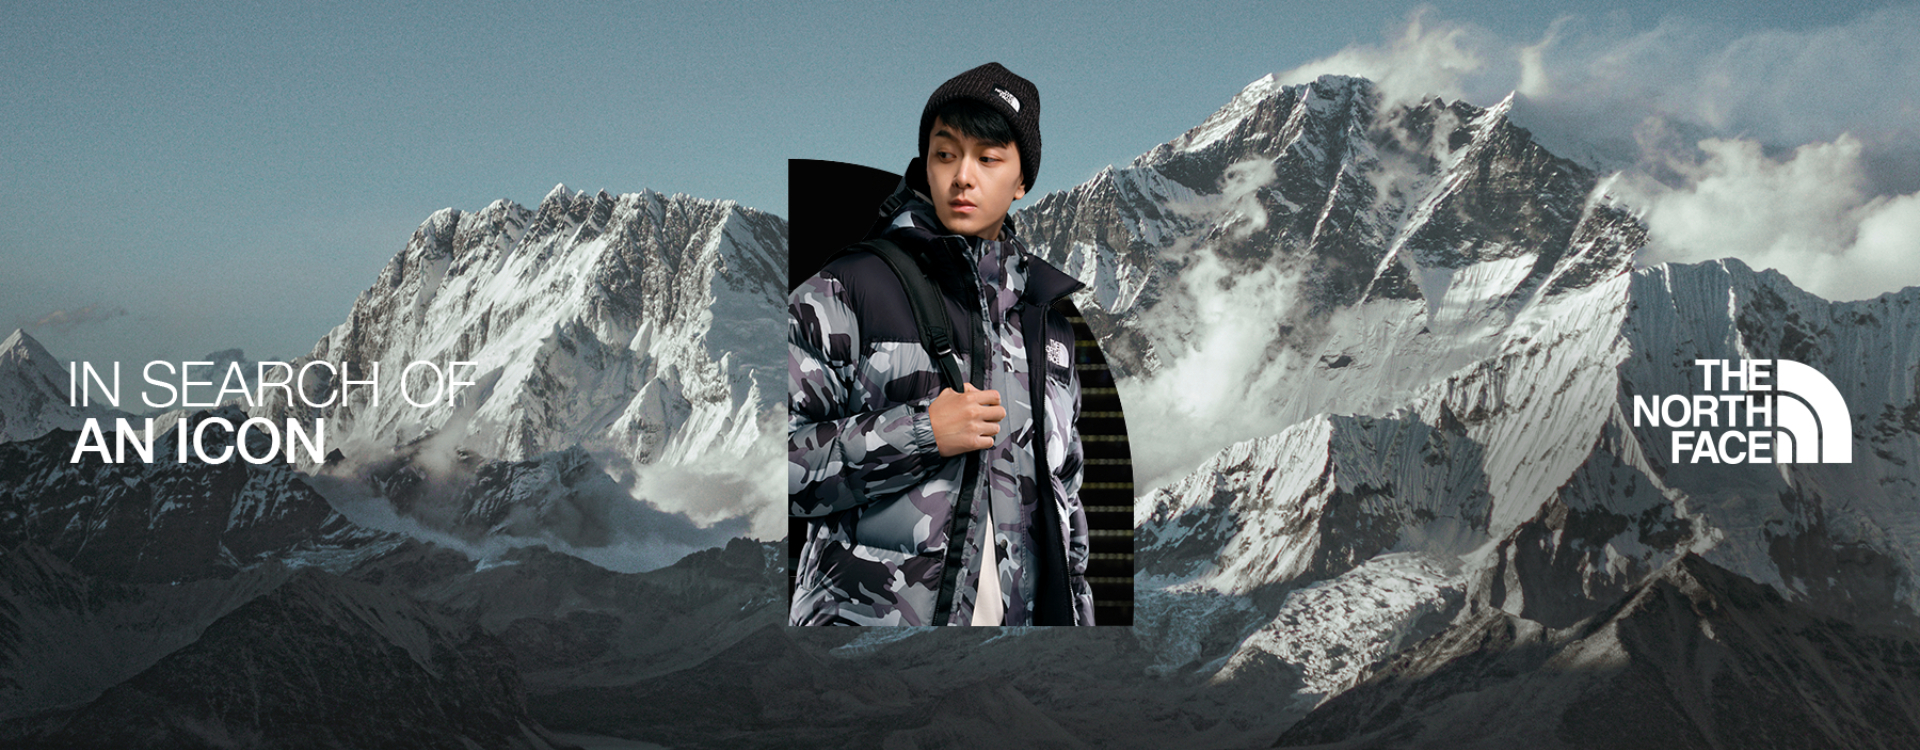 THE NORTH FACE 2021全新秋冬ICON系列上市#INSEARCHOF 探索不可或缺的 